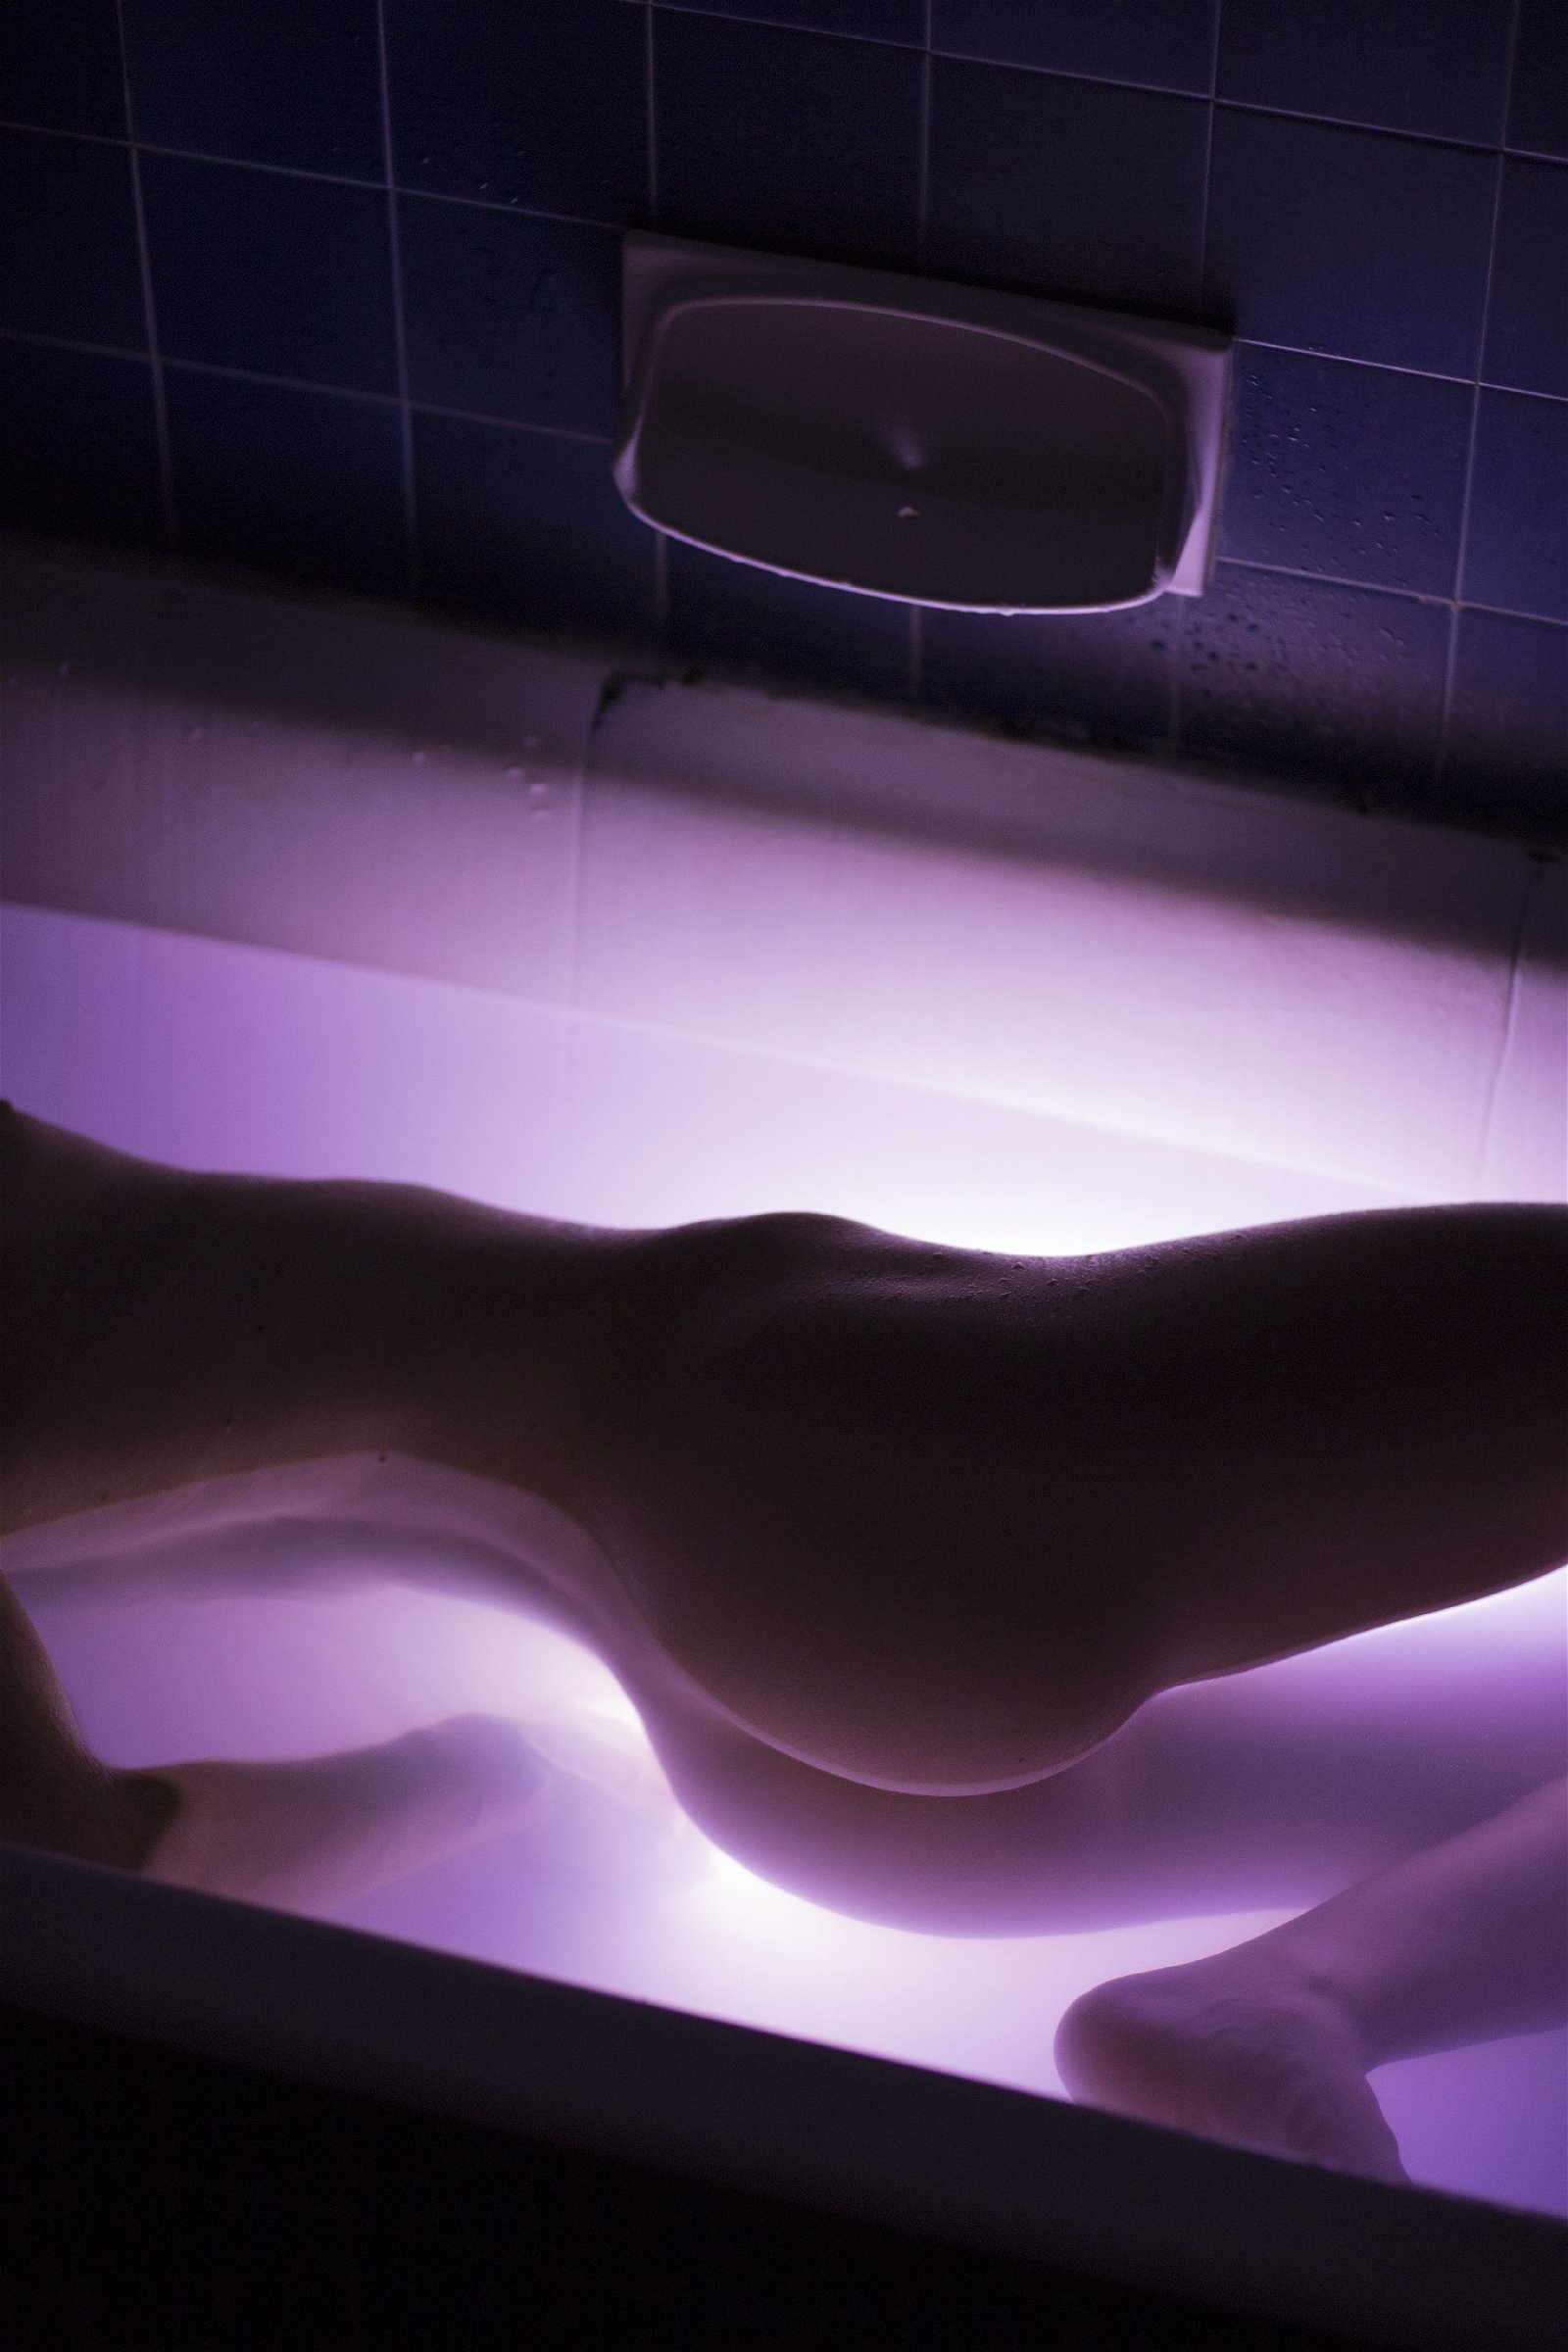 Photo by PureForm with the username @PureForm,  January 23, 2018 at 6:54 PM and the text says 'elle-aussi:

Northern Light - 2015 #Monsieurtok  #EleaRage  #MeTwo  #nude  #girl  #sexy  #Lush  #Bath  #Qudos'